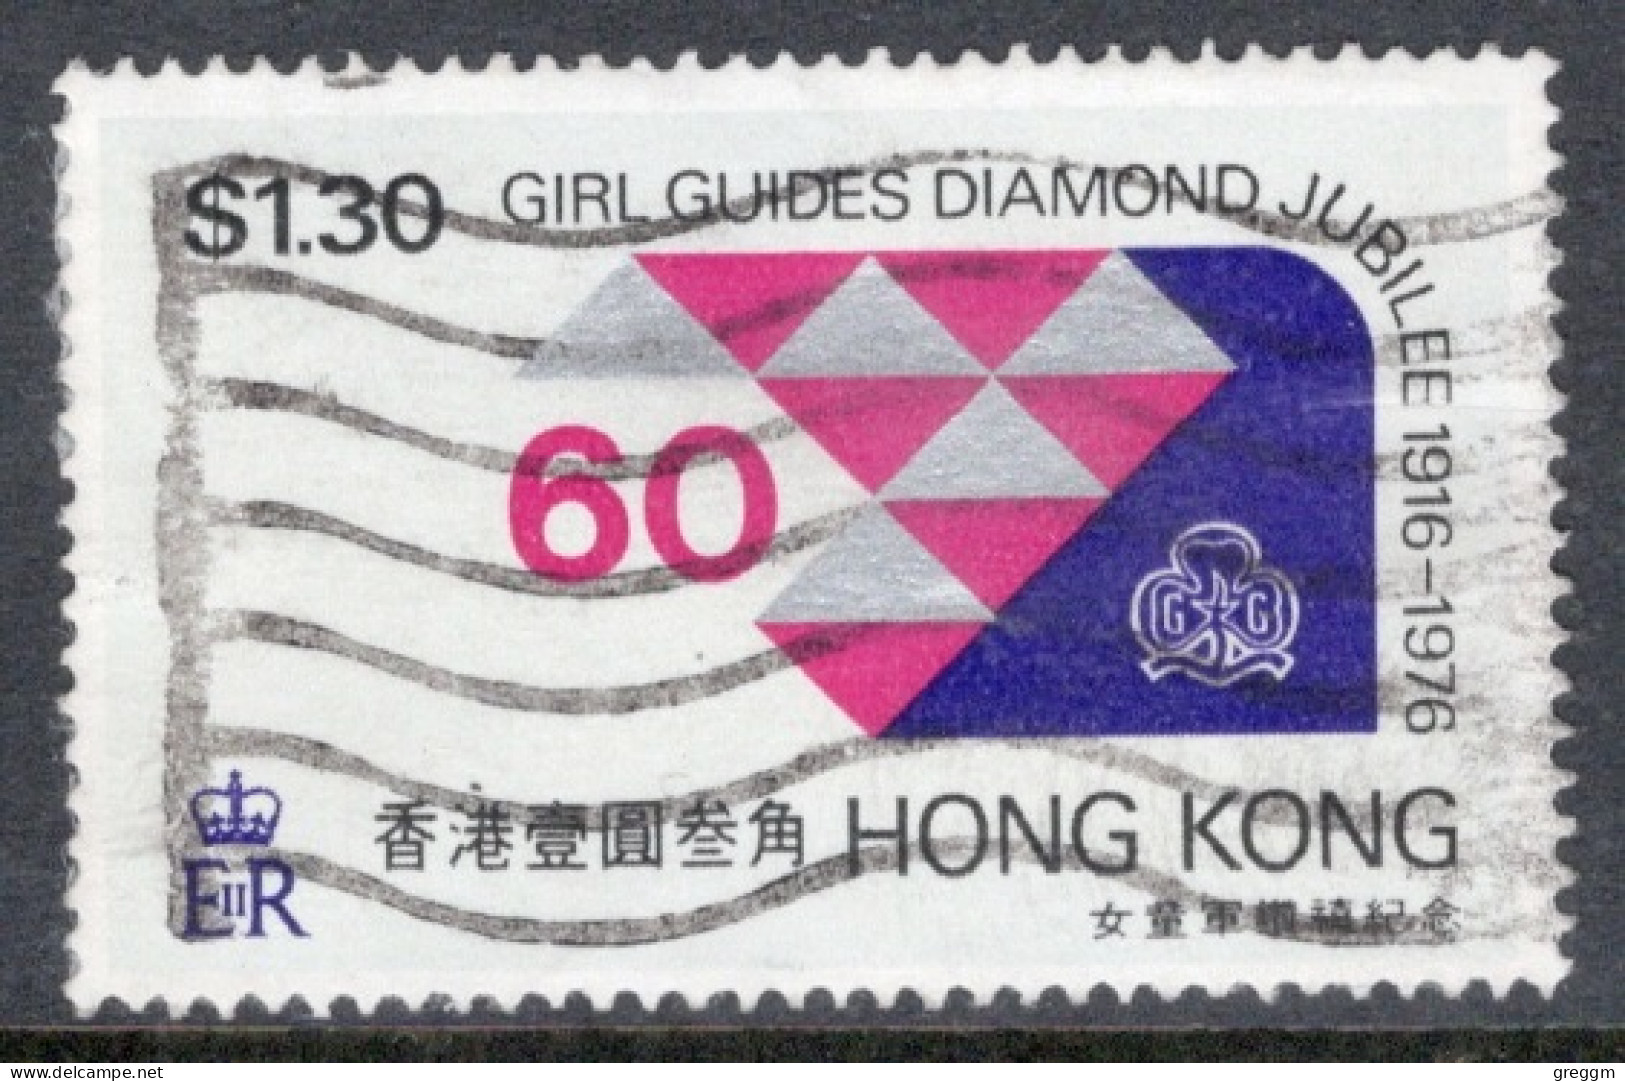 Hong Kong 1976 A Single Stamp To Celebrate The 60th Anniversary Of Girl Guides In Fine Used - Gebruikt